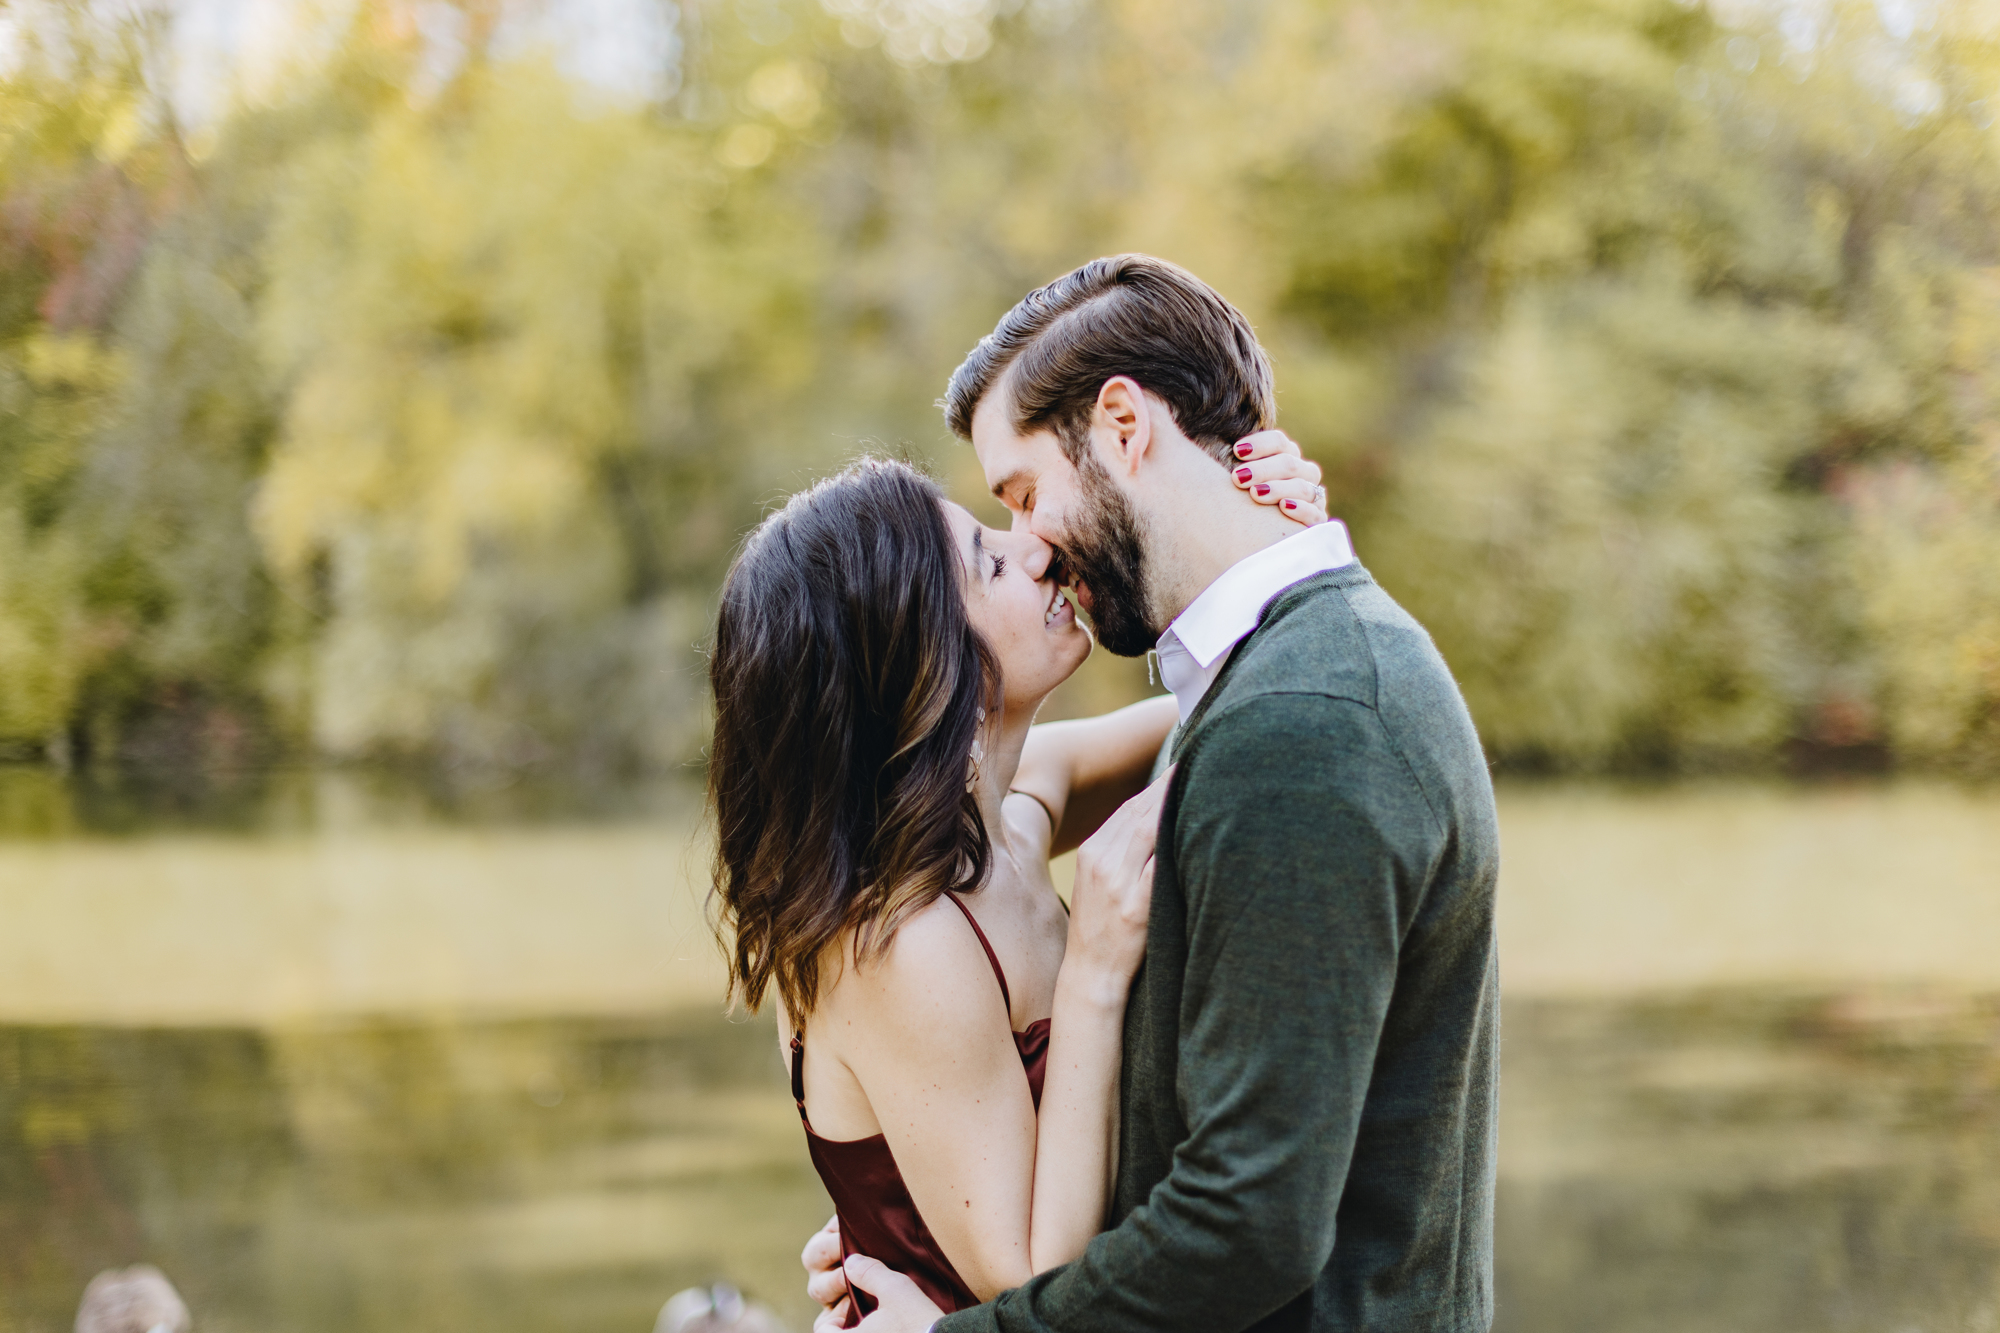 Lovely Central Park Engagement Photos in Fall